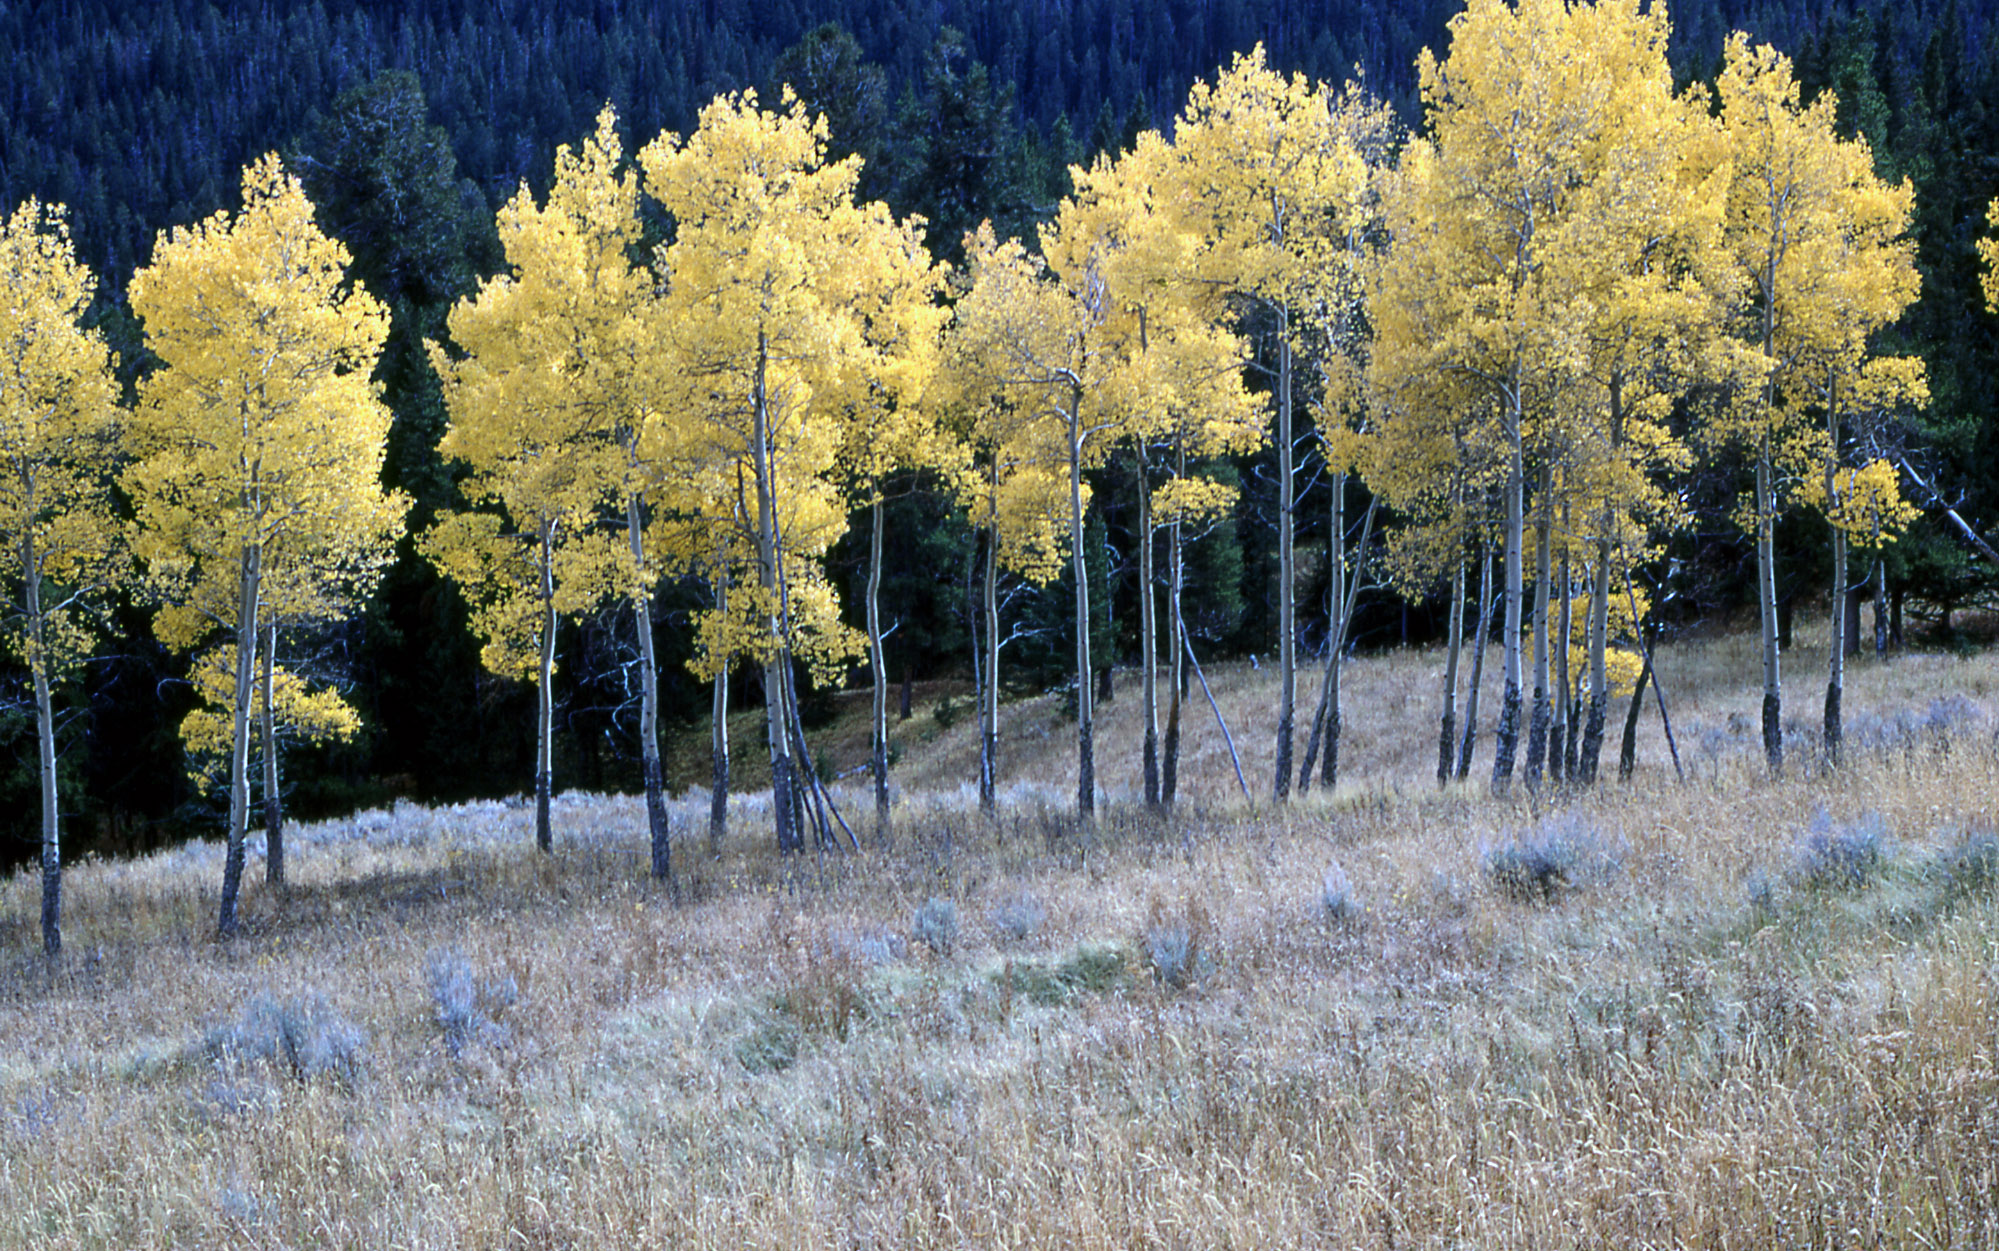 Quaking Aspen trees are one of the ozone sensitive species found at Yellowstone NP.